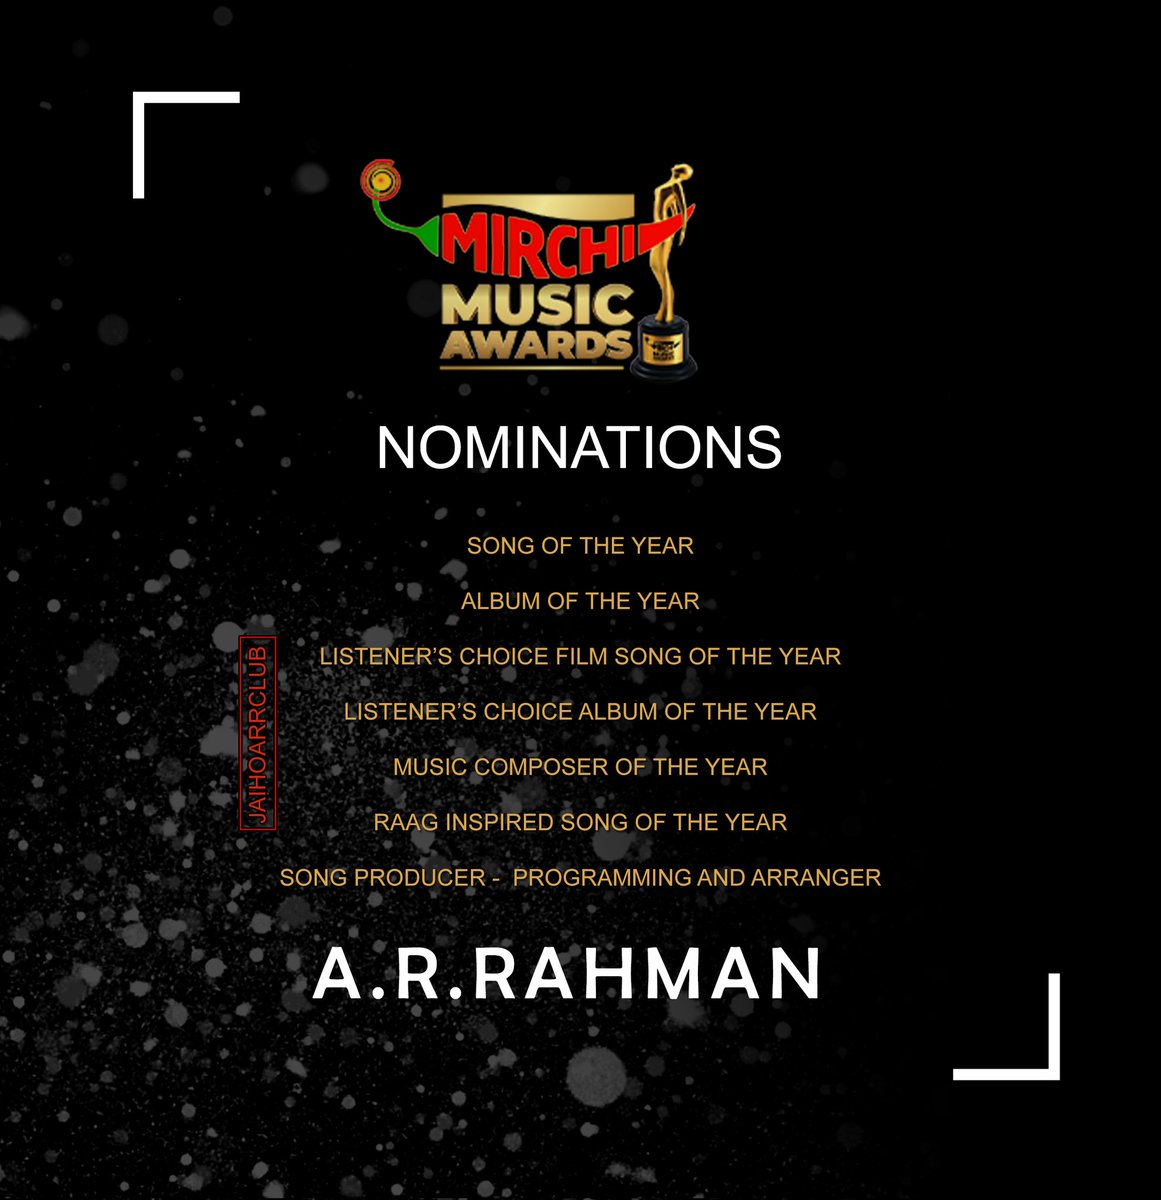 Maestro @arrahman is nominated for 7+ categories at Mirchi Music Awards . 🔥

Albums Nominated:
1. #99Songs
2. #AtrangiRe
3. #DilBechara
4. #Mimi

#MirchiMusicAwards2022